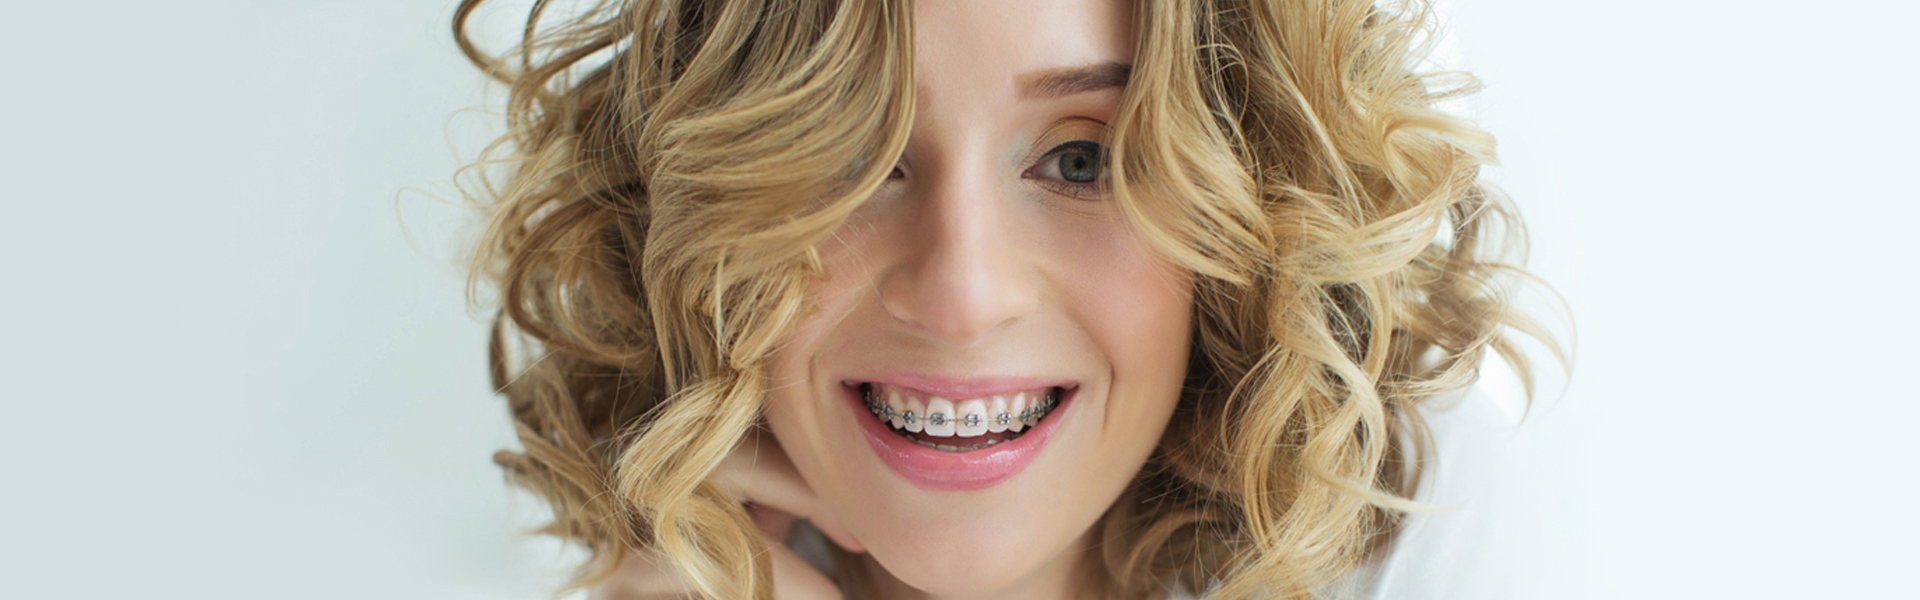 Why You Need to Consider Dental Braces for Your Teeth